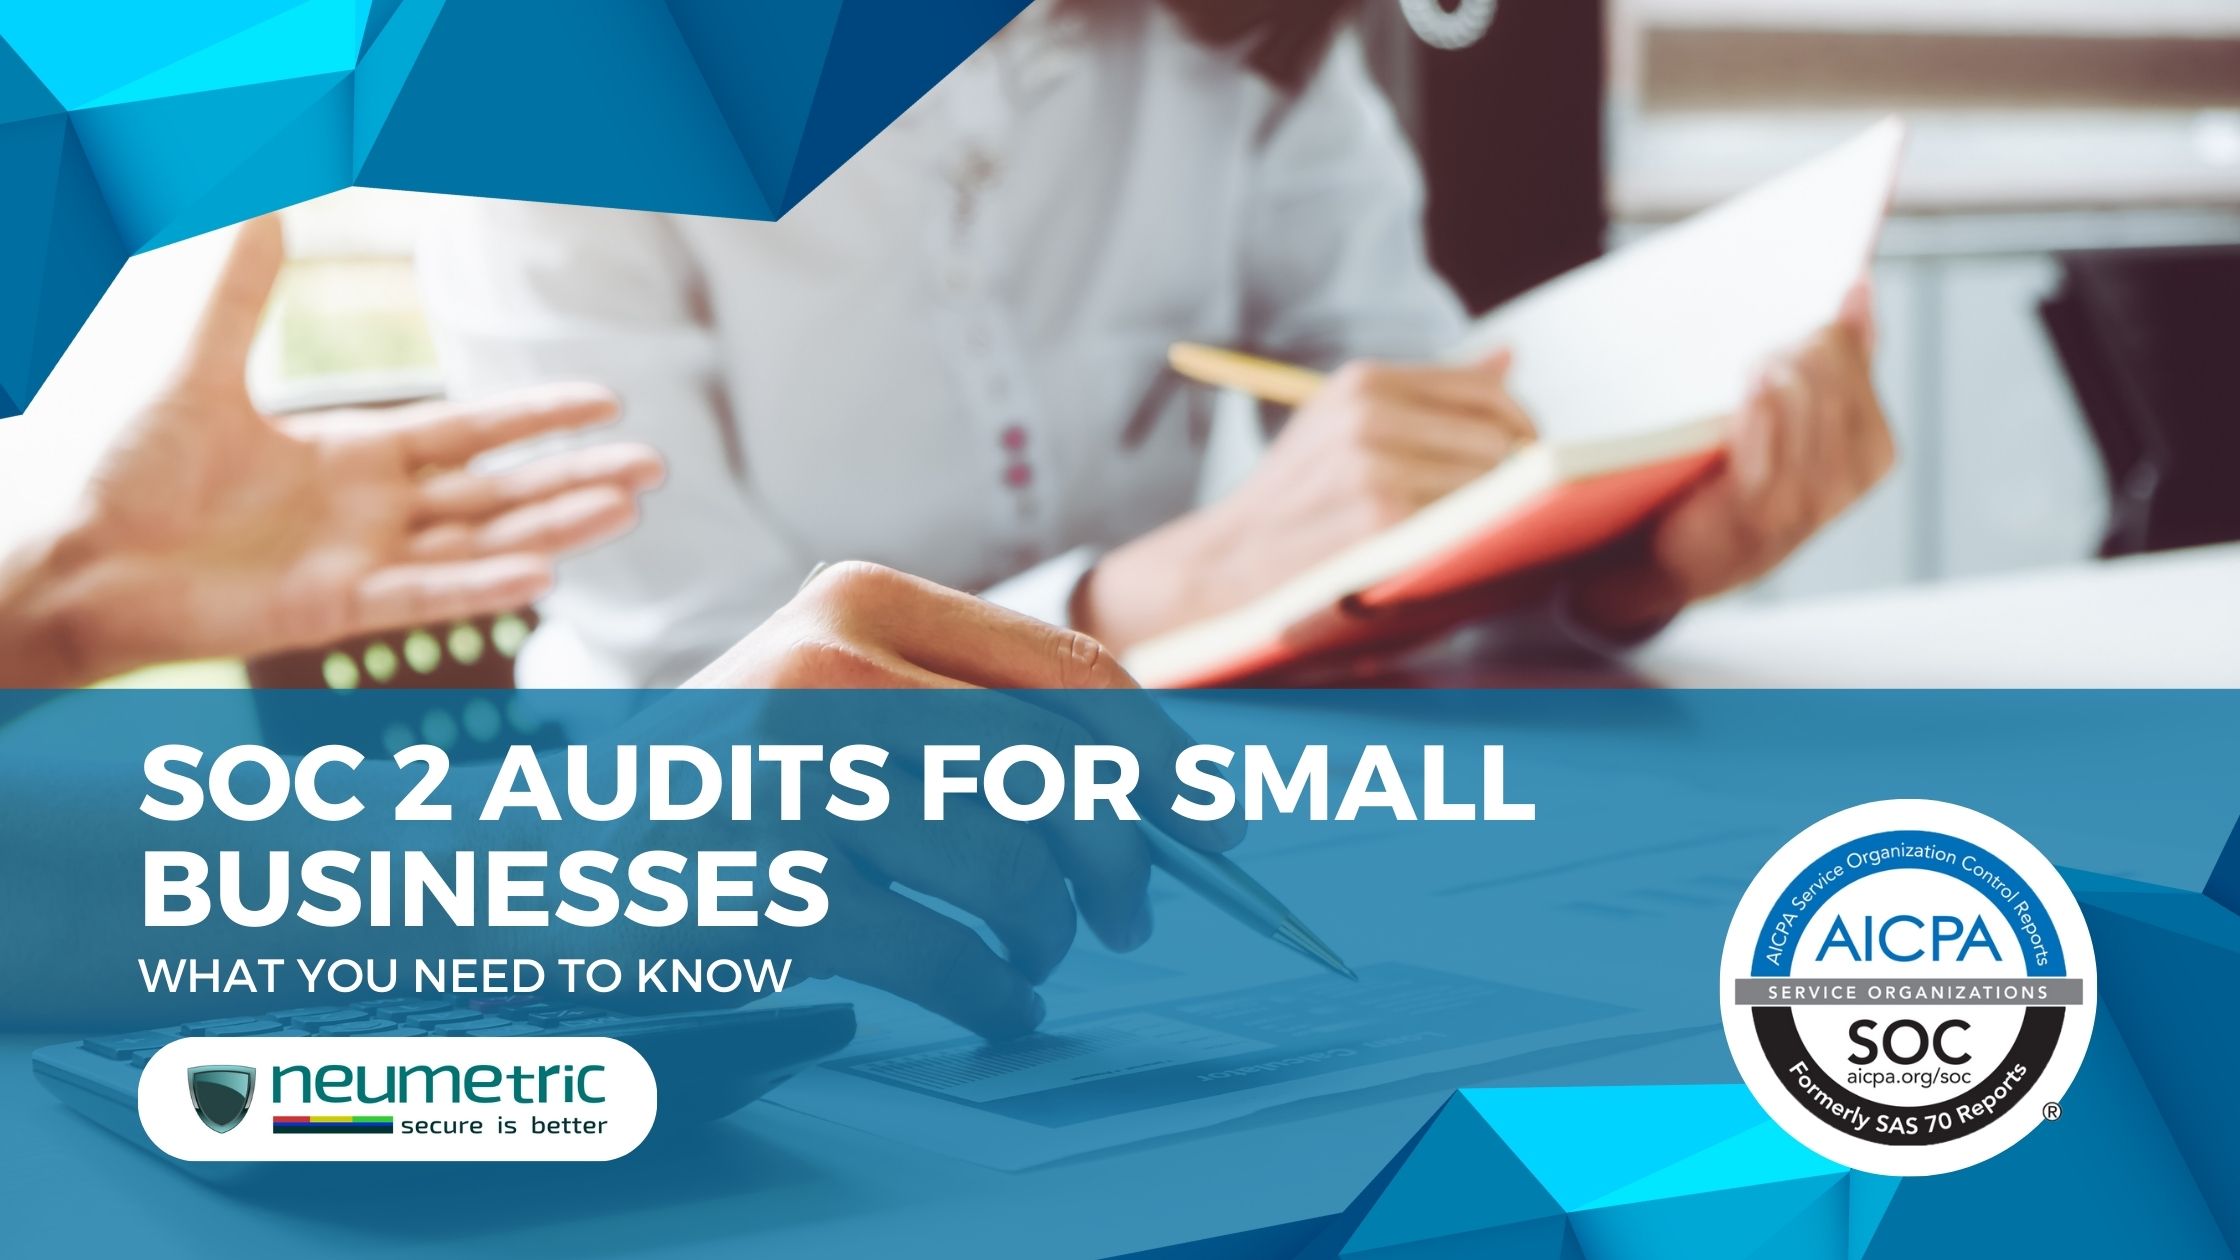 SOC 2 Audits for Small Businesses: What You Need to Know